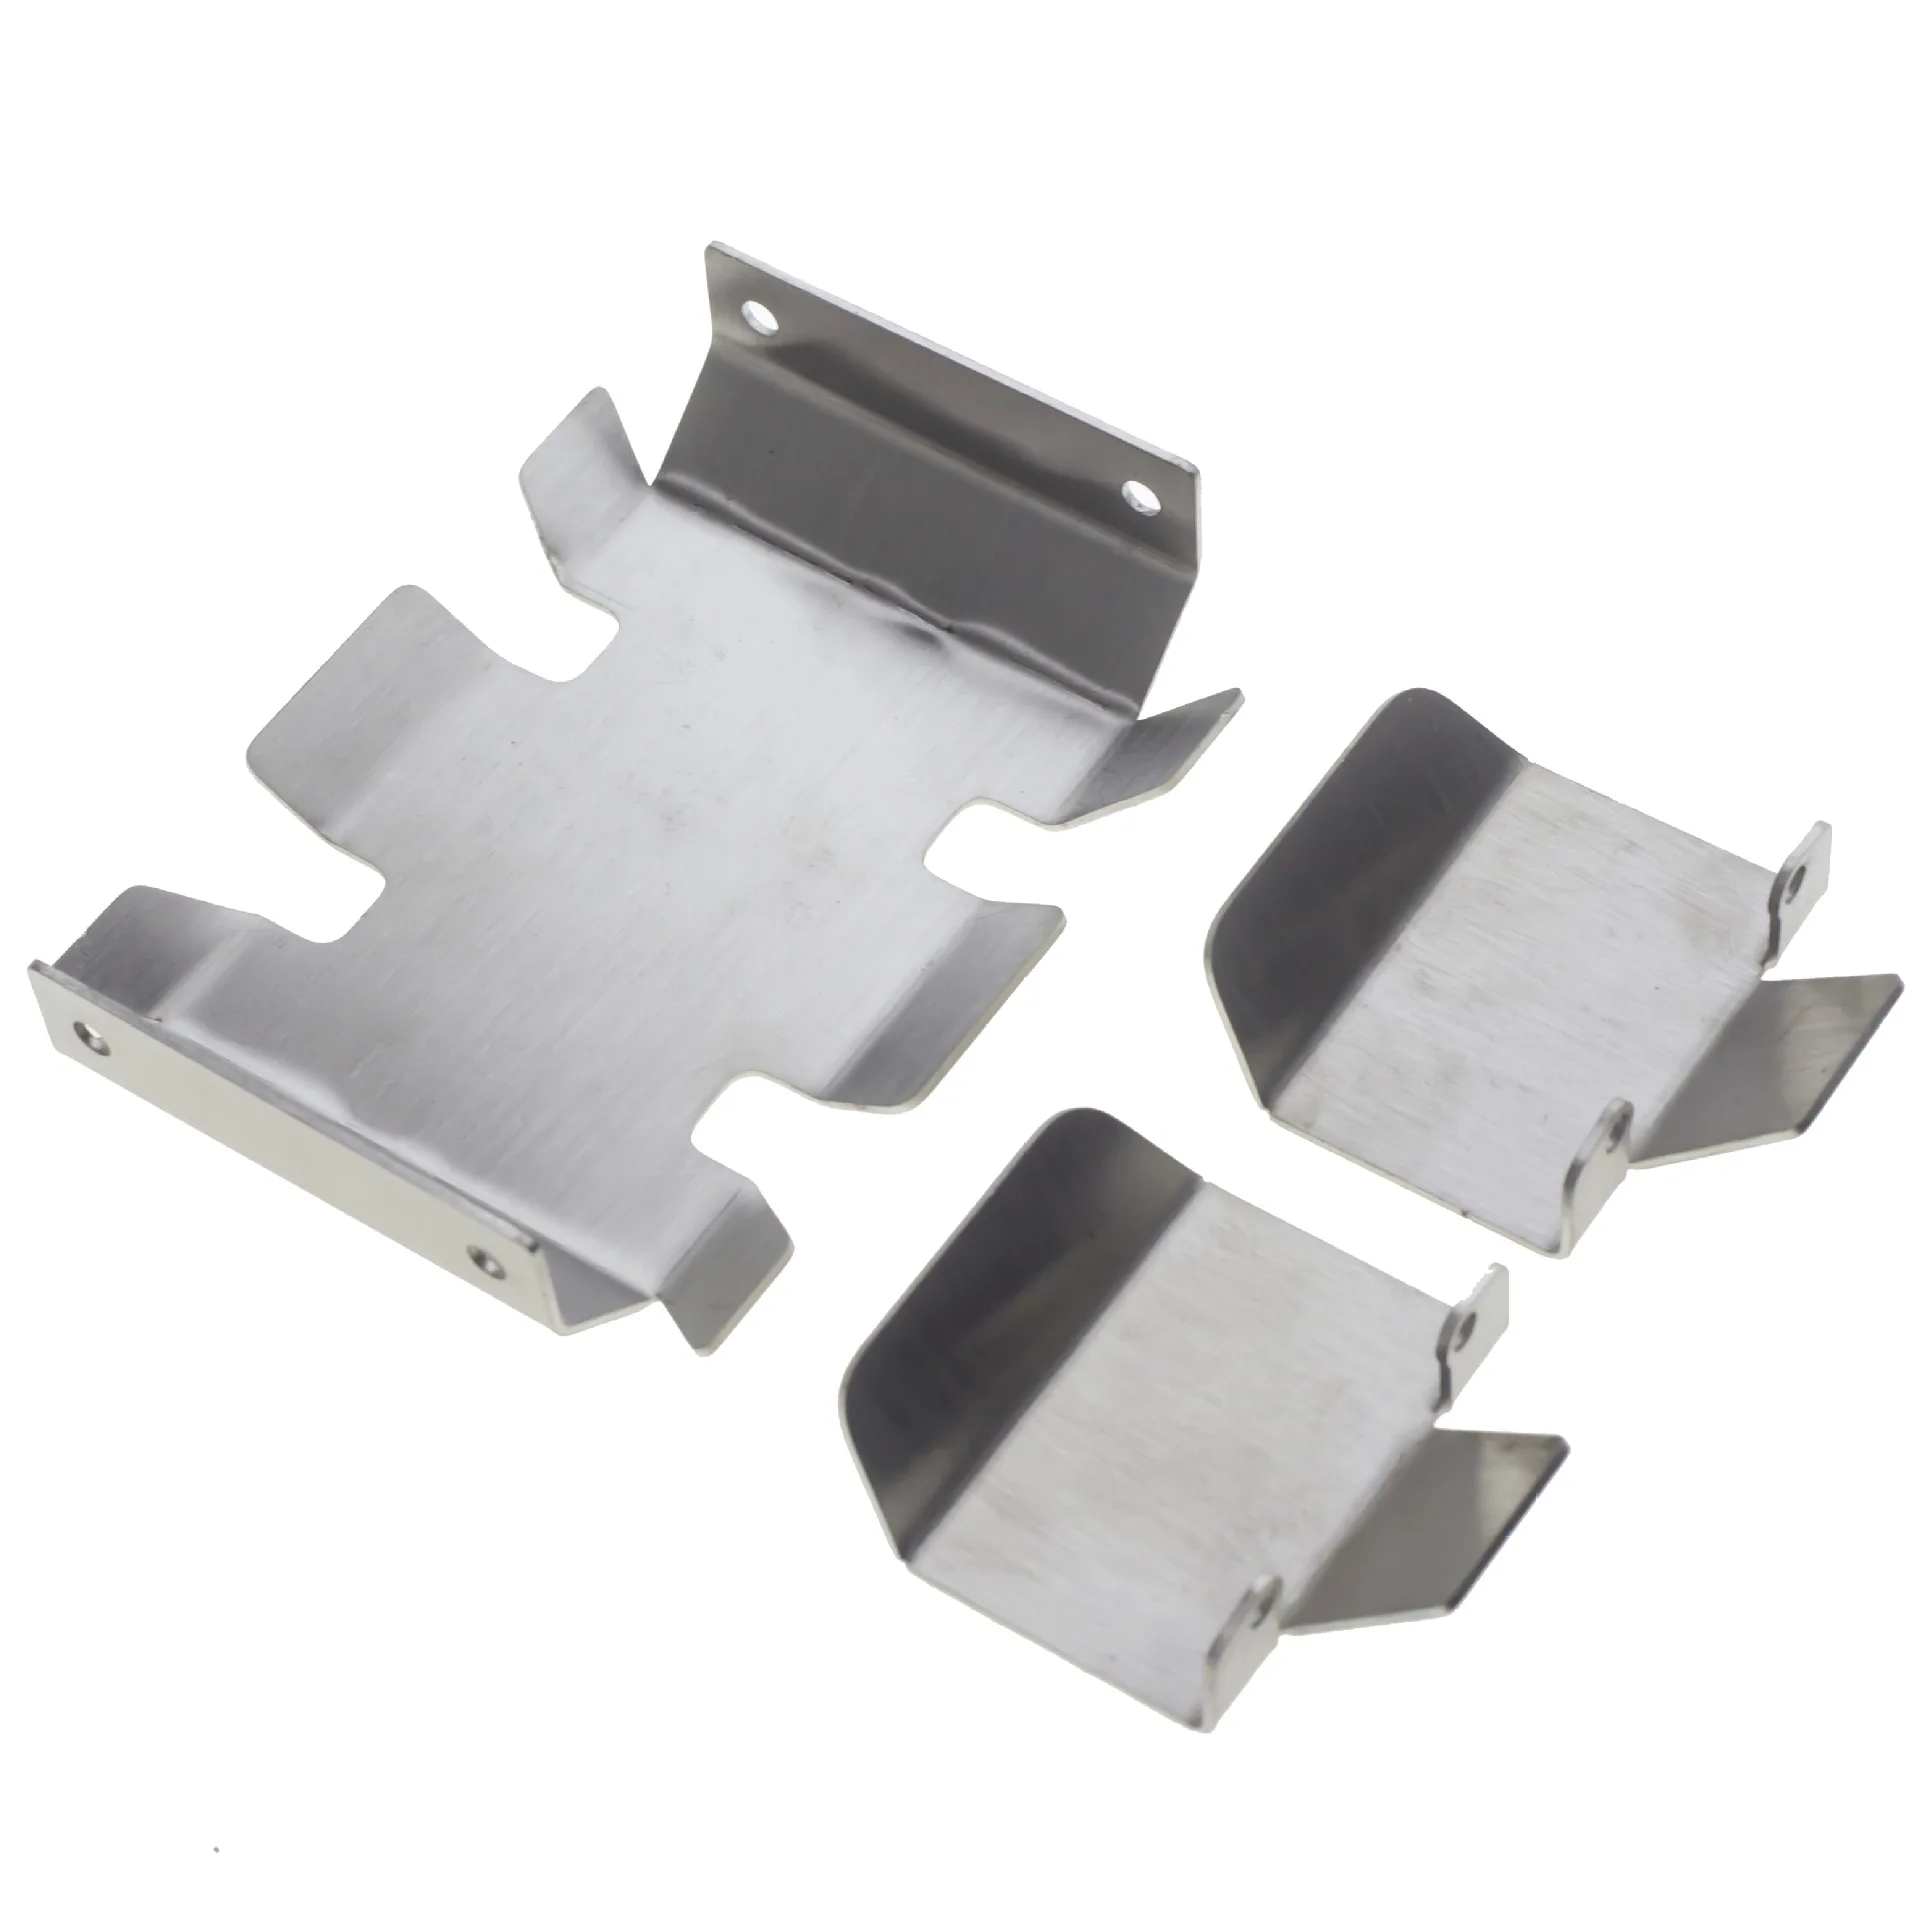 

3pcs Stainless Steel Chassis Armor Axle Protector Skid Plate for MST CFX CMX RC Crawler Car Upgrade Parts